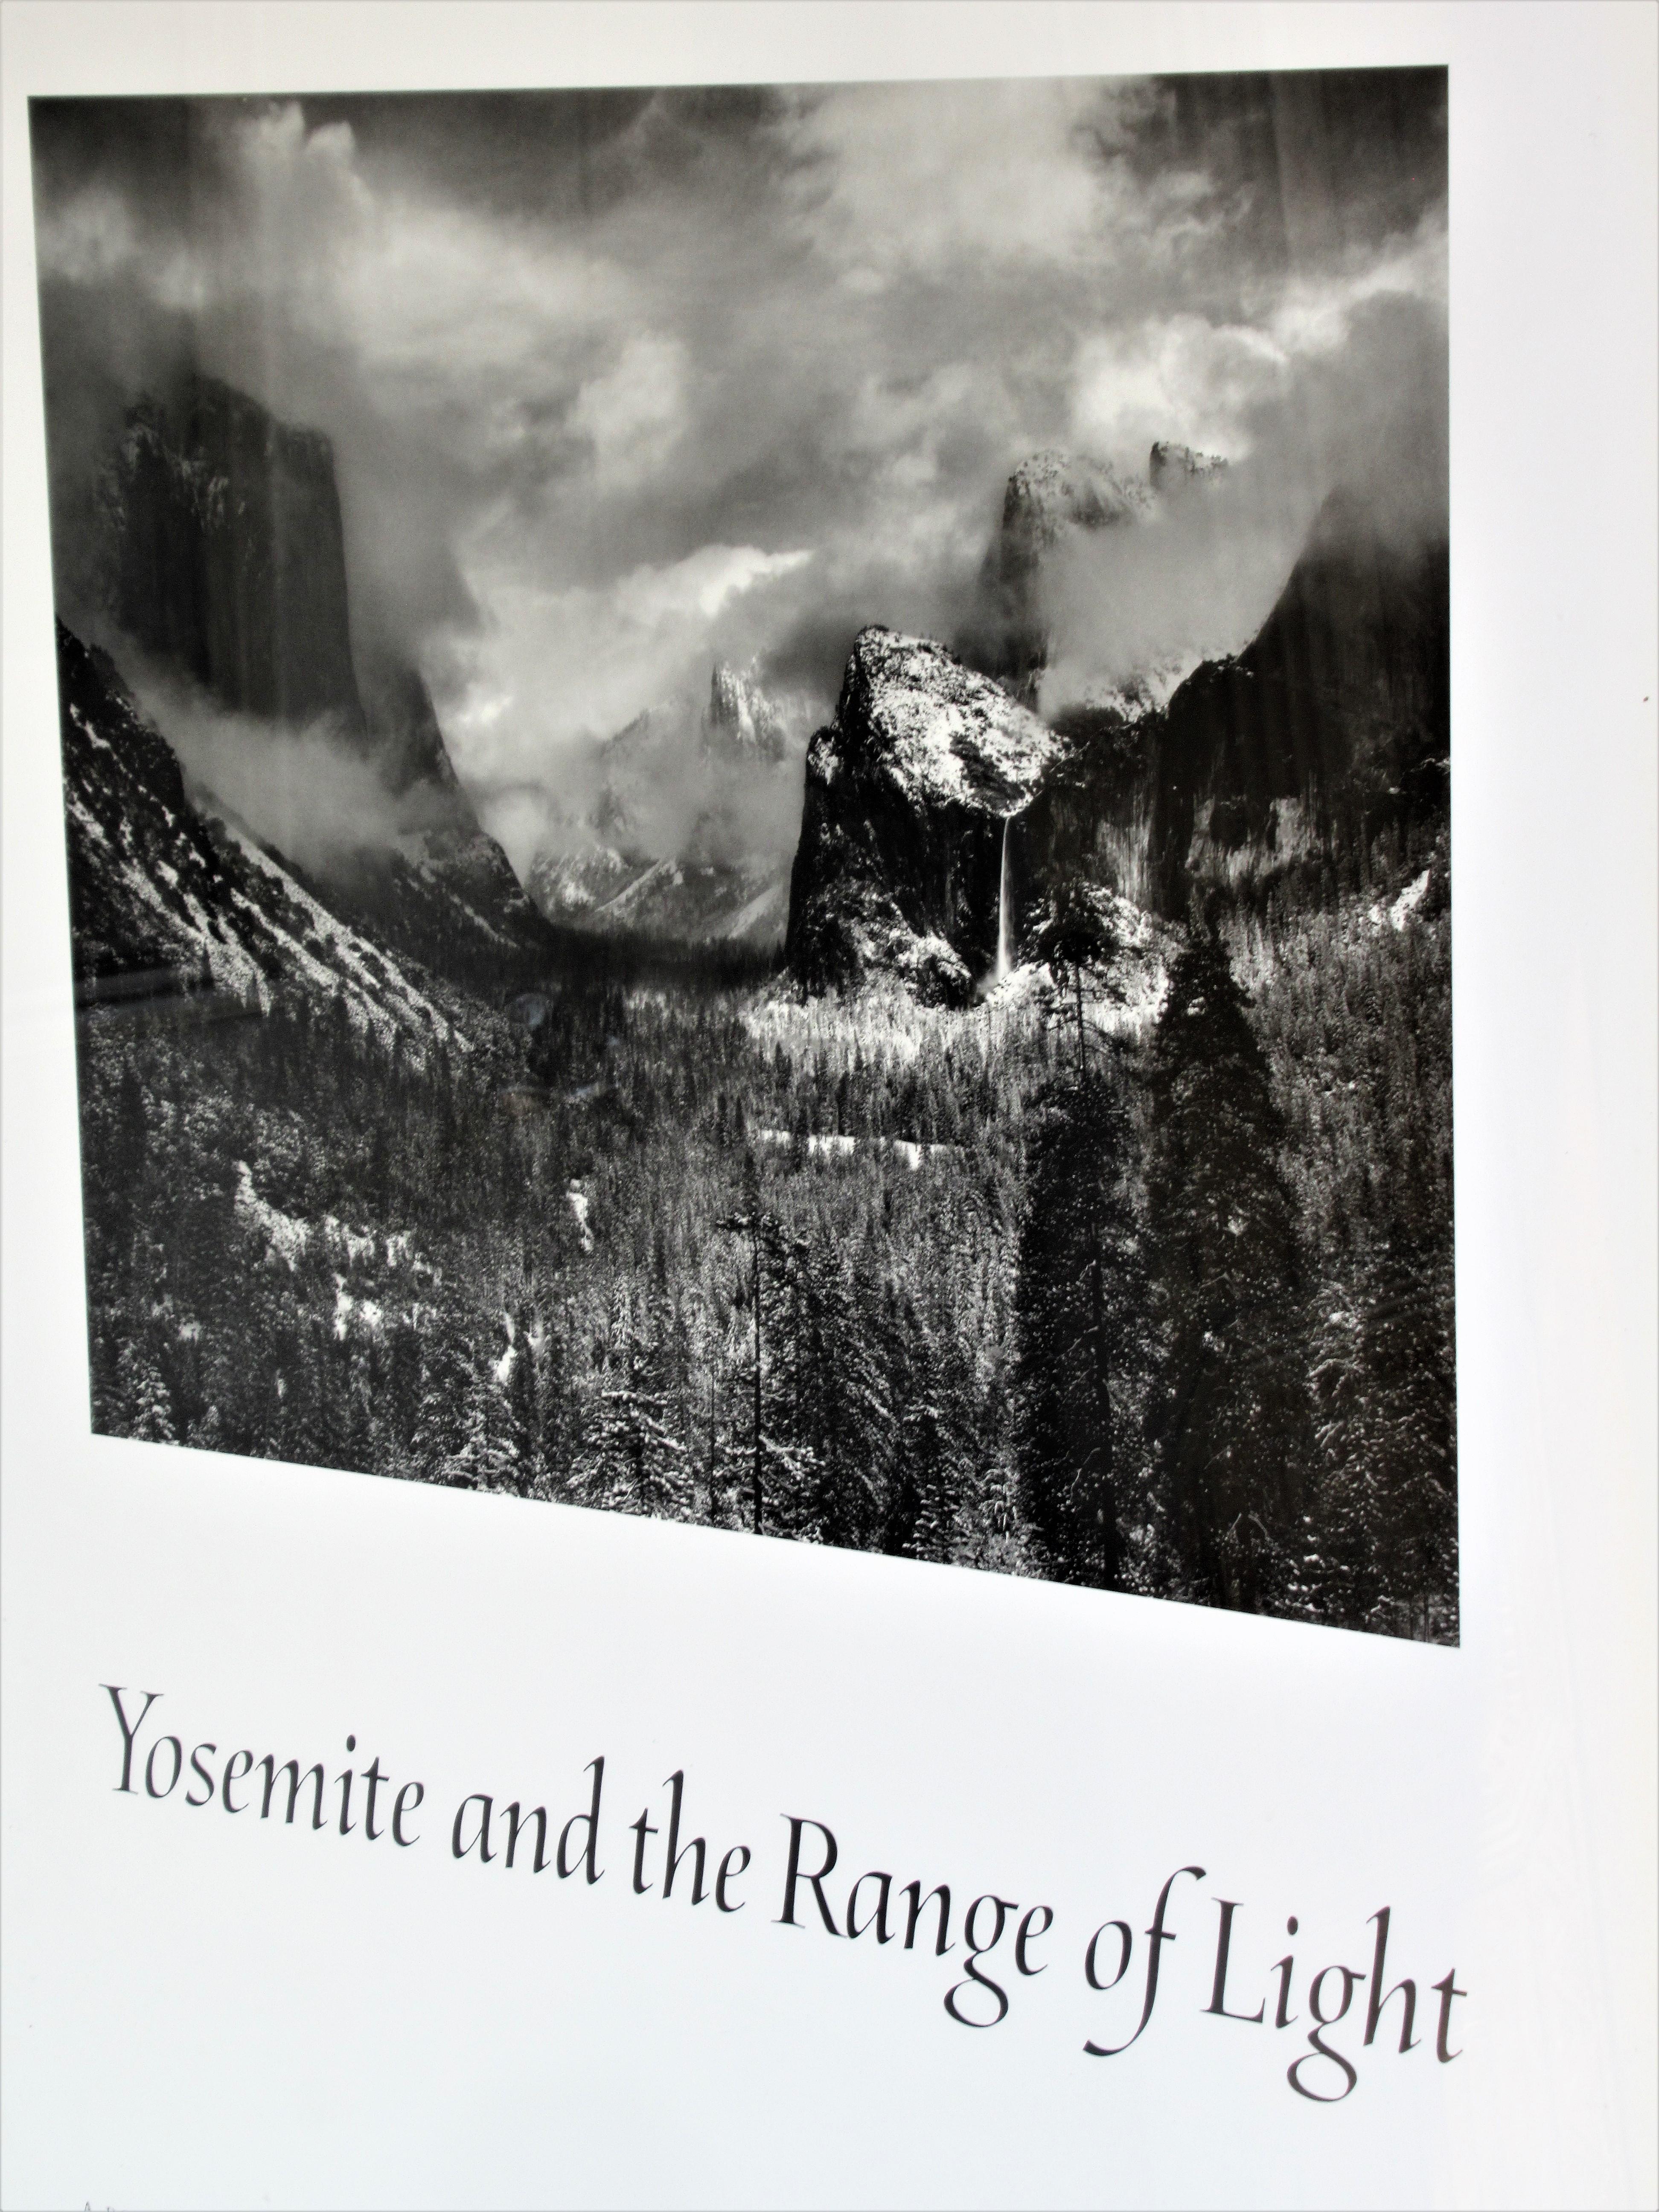 Ansel Adams, Yosemite and the range of light, authorized poster by The New York Graphic Society, 1981 - The trustees of the Ansel Adams publishing rights trust. It is set in the original issued brushed golden brass metal frame. Look at all pictures